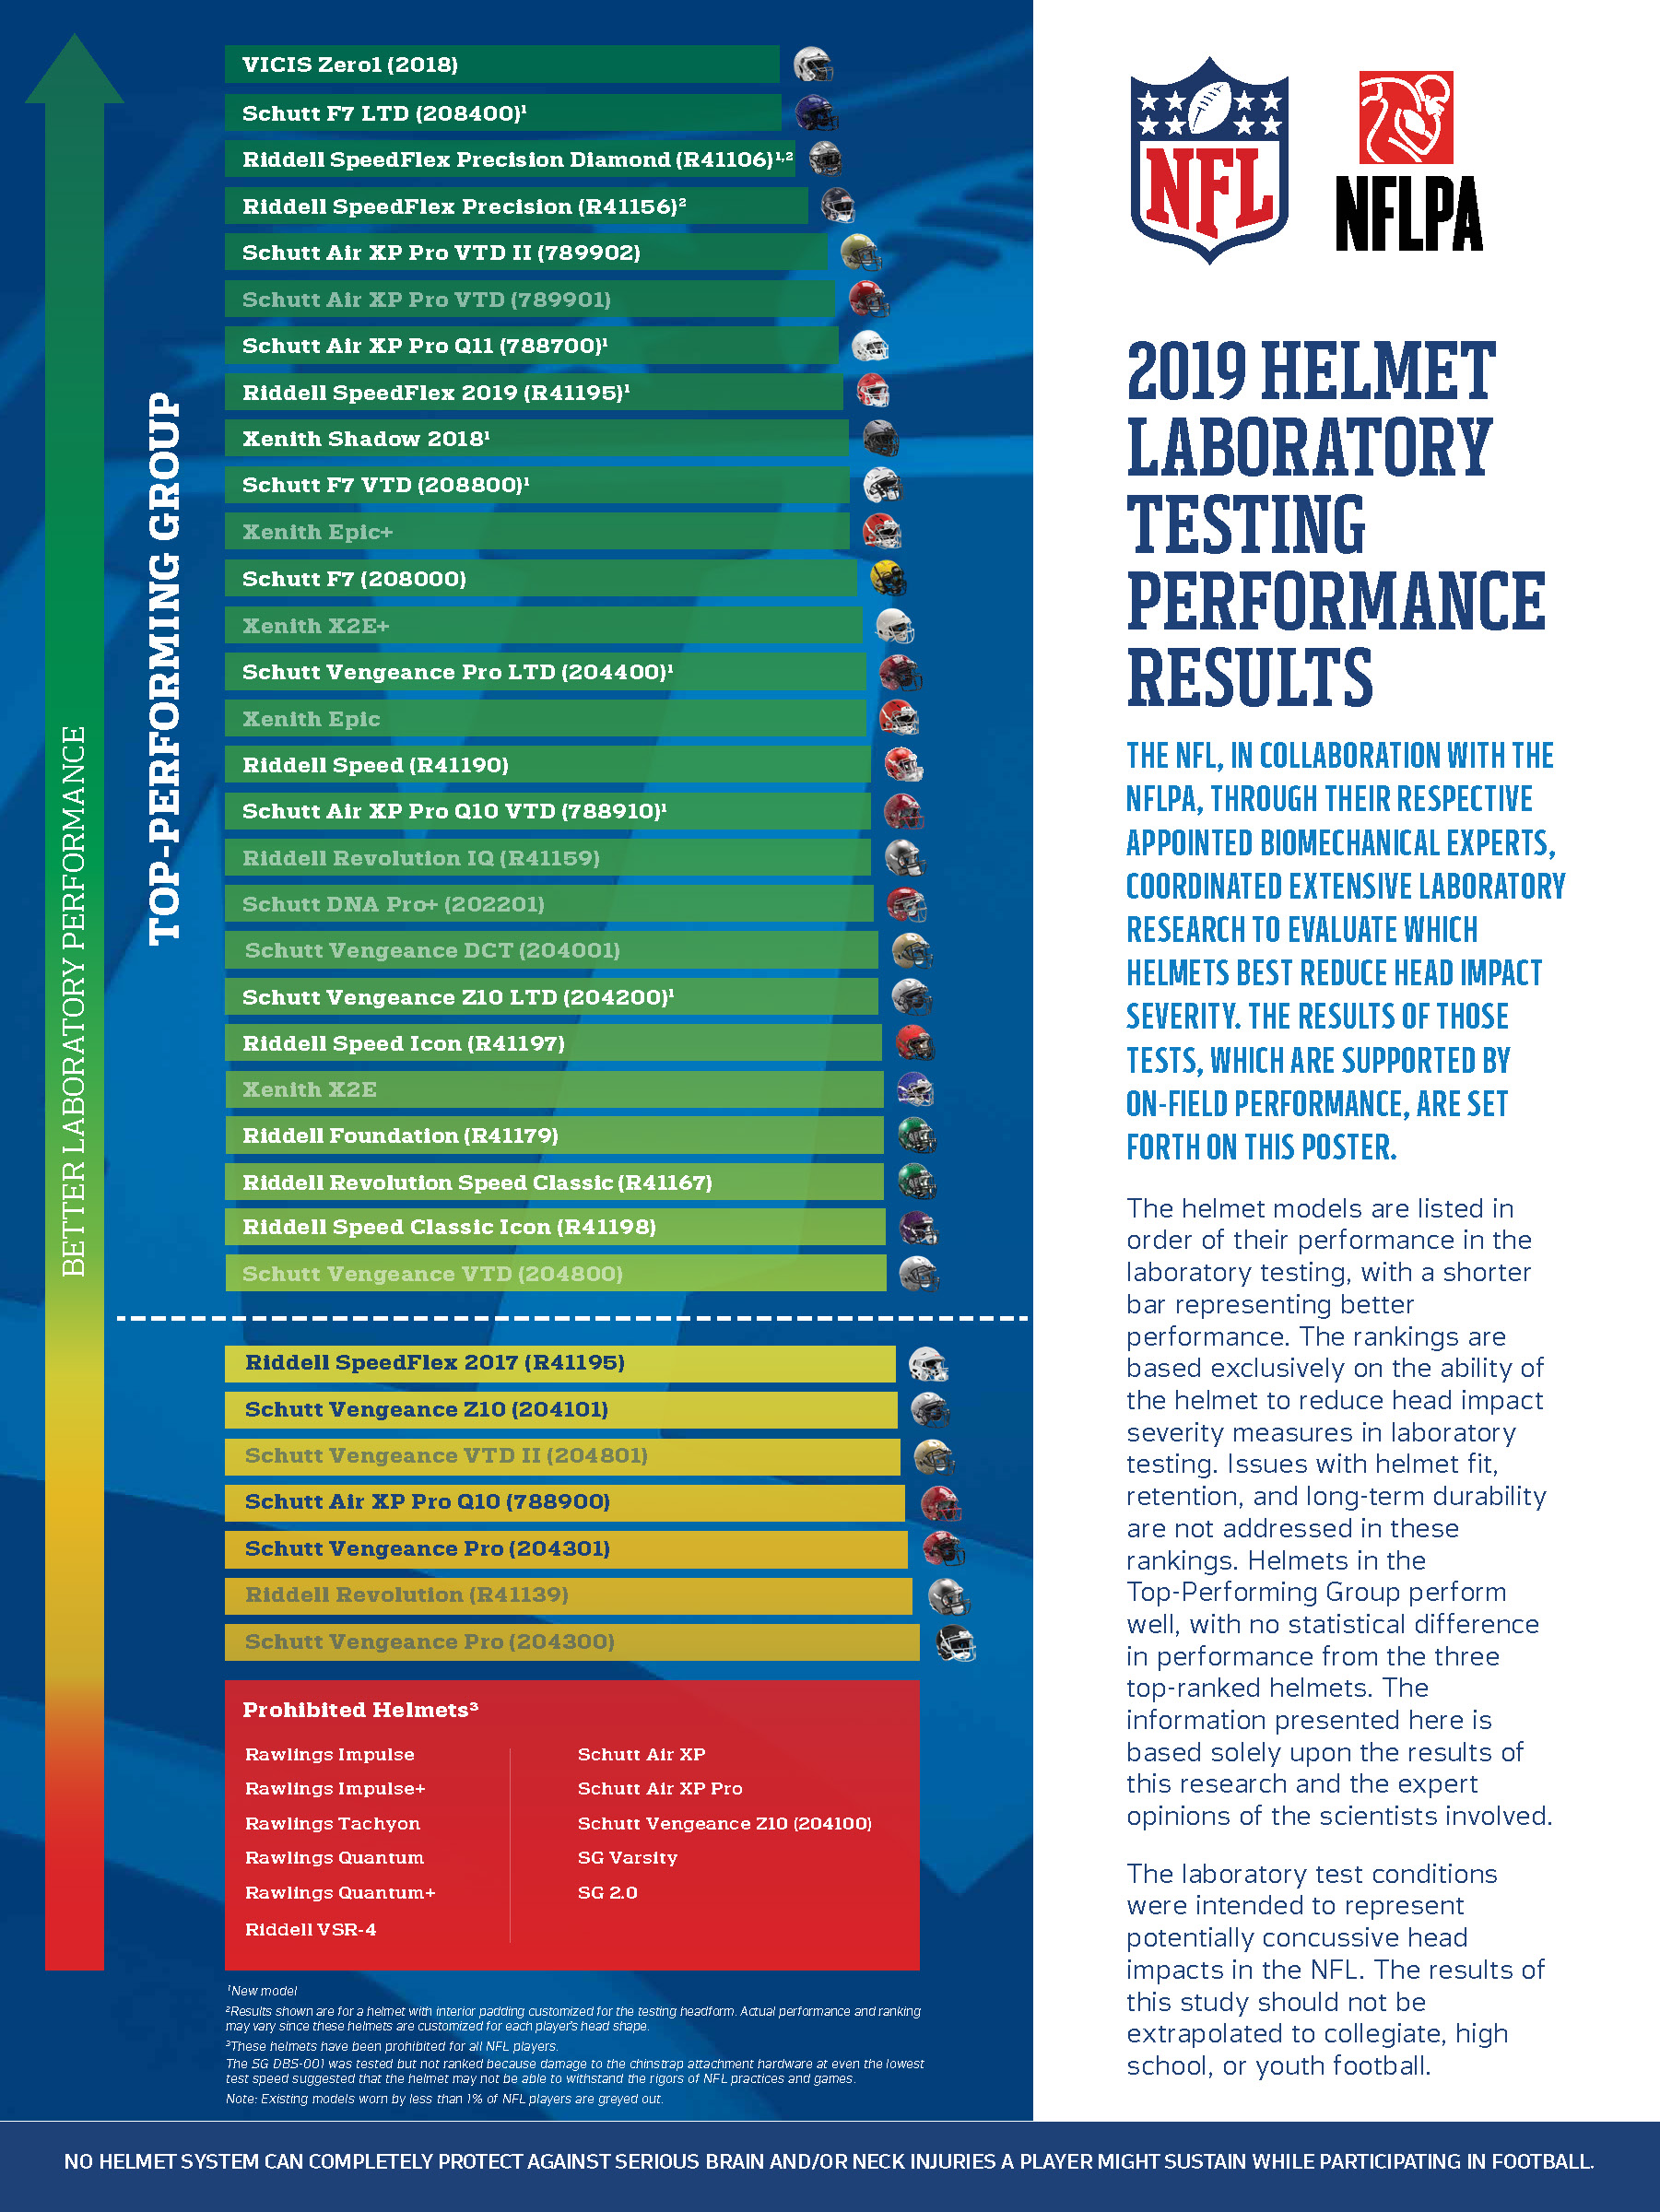 NFL and NFLPA Release 2019 Helmet Laboratory Testing Performance Results